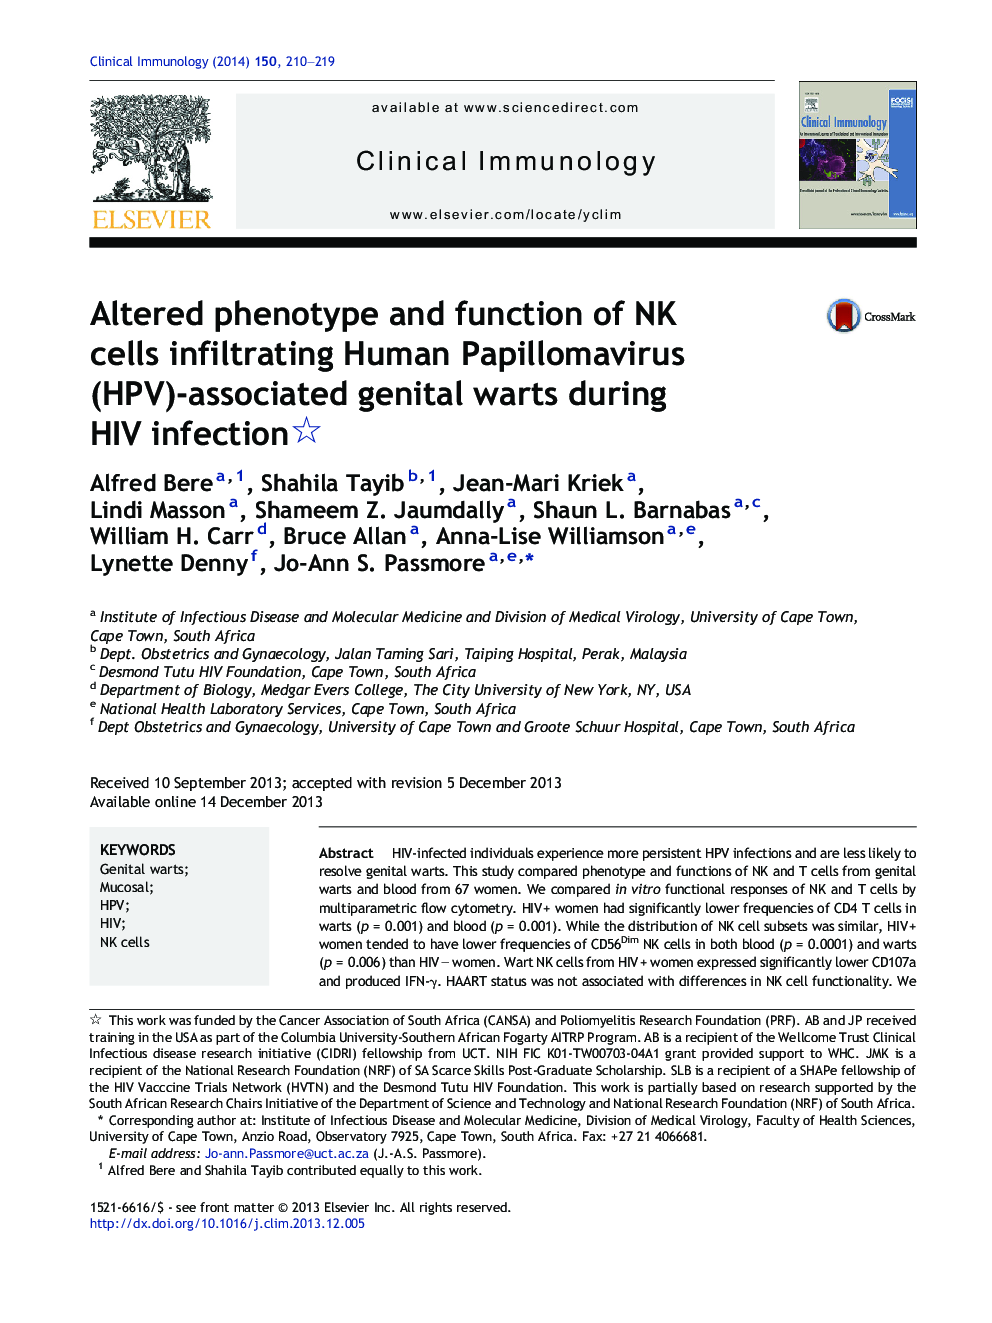 Altered phenotype and function of NK cells infiltrating Human Papillomavirus (HPV)-associated genital warts during HIV infection